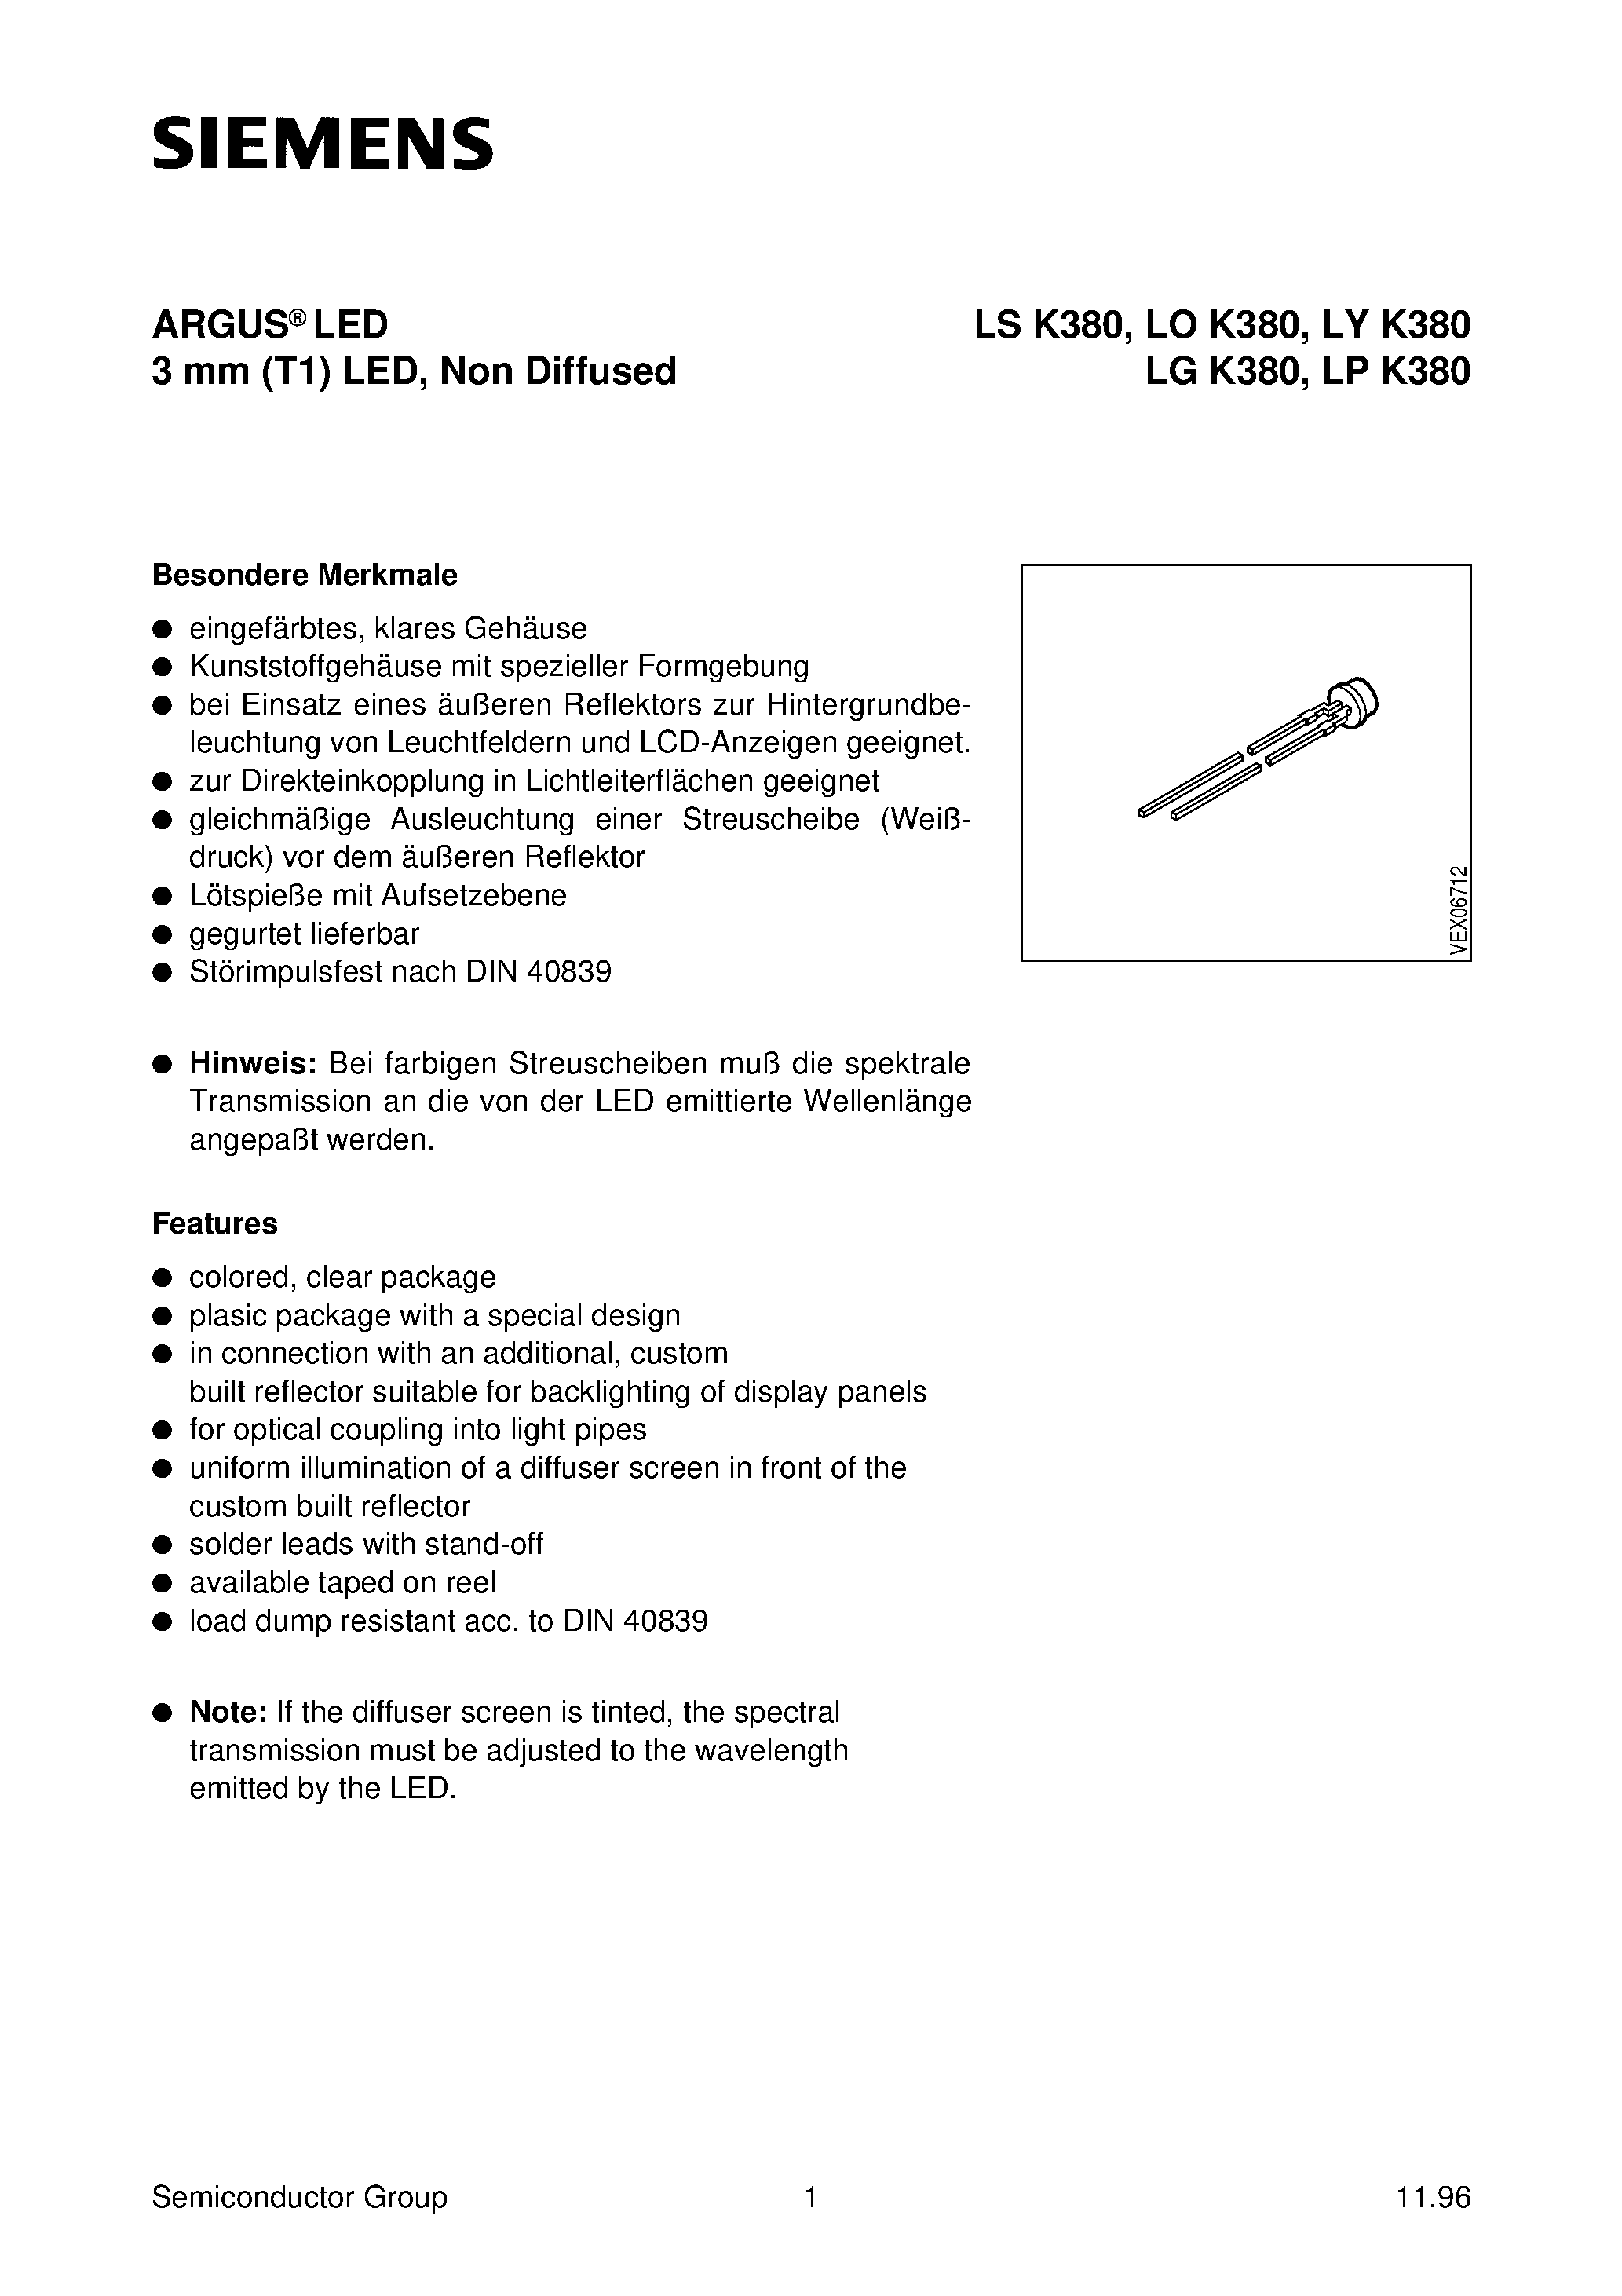 Datasheet LSK380-Q - ARGUS LED 3 mm T1 LED / Non Diffused page 1